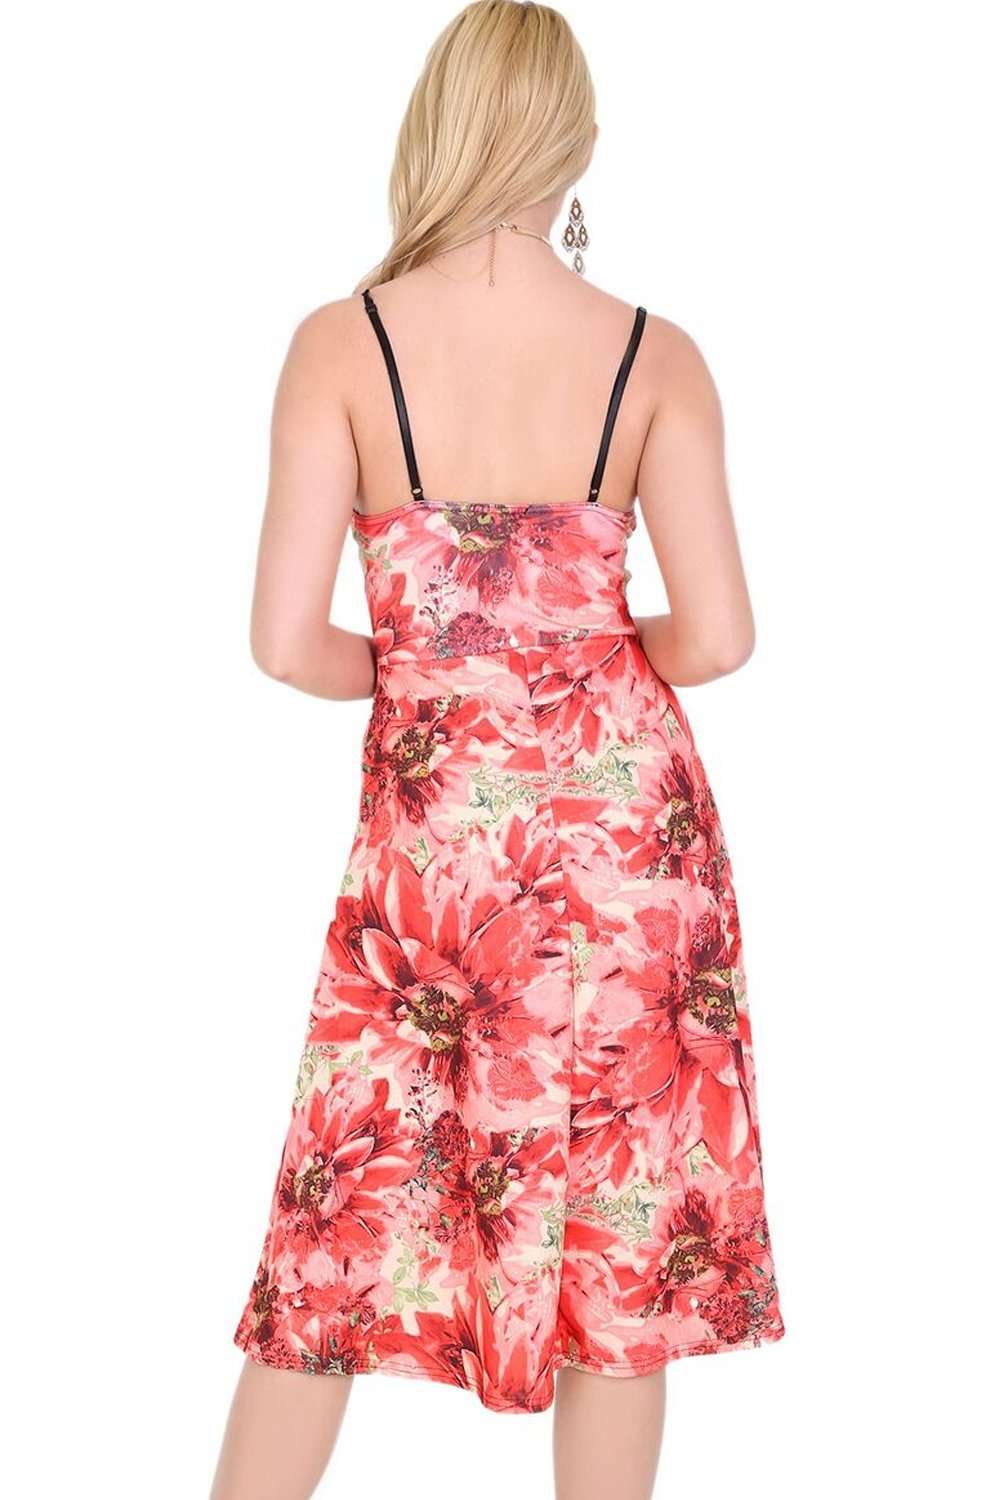 Veronica Strappy Red Floral Midi Swing Dress - bejealous-com